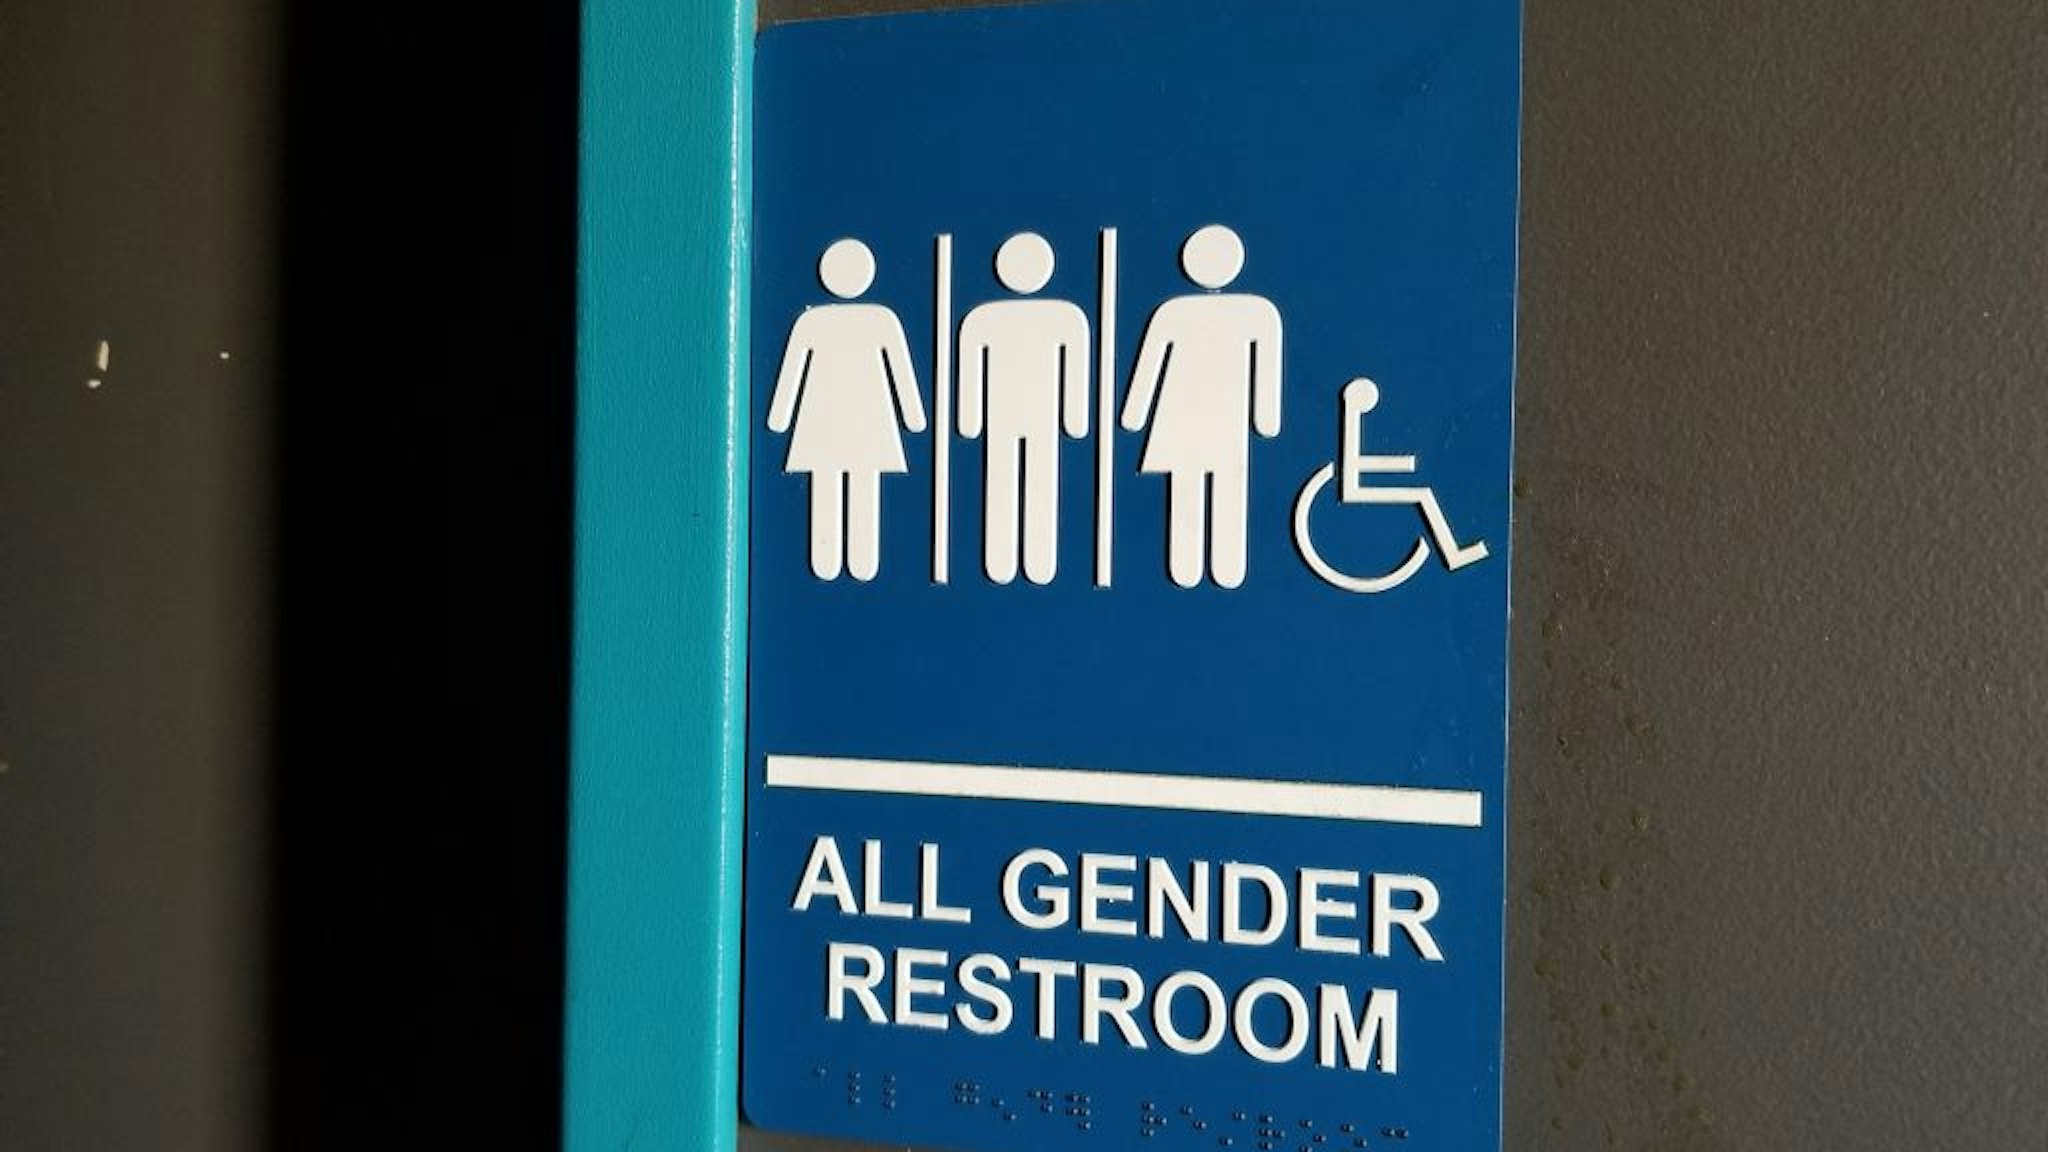 Close-up of sign for all gender restroom in Dublin, California, with male, female and gender-inclusive stick figure illustrations, March 13, 2019.